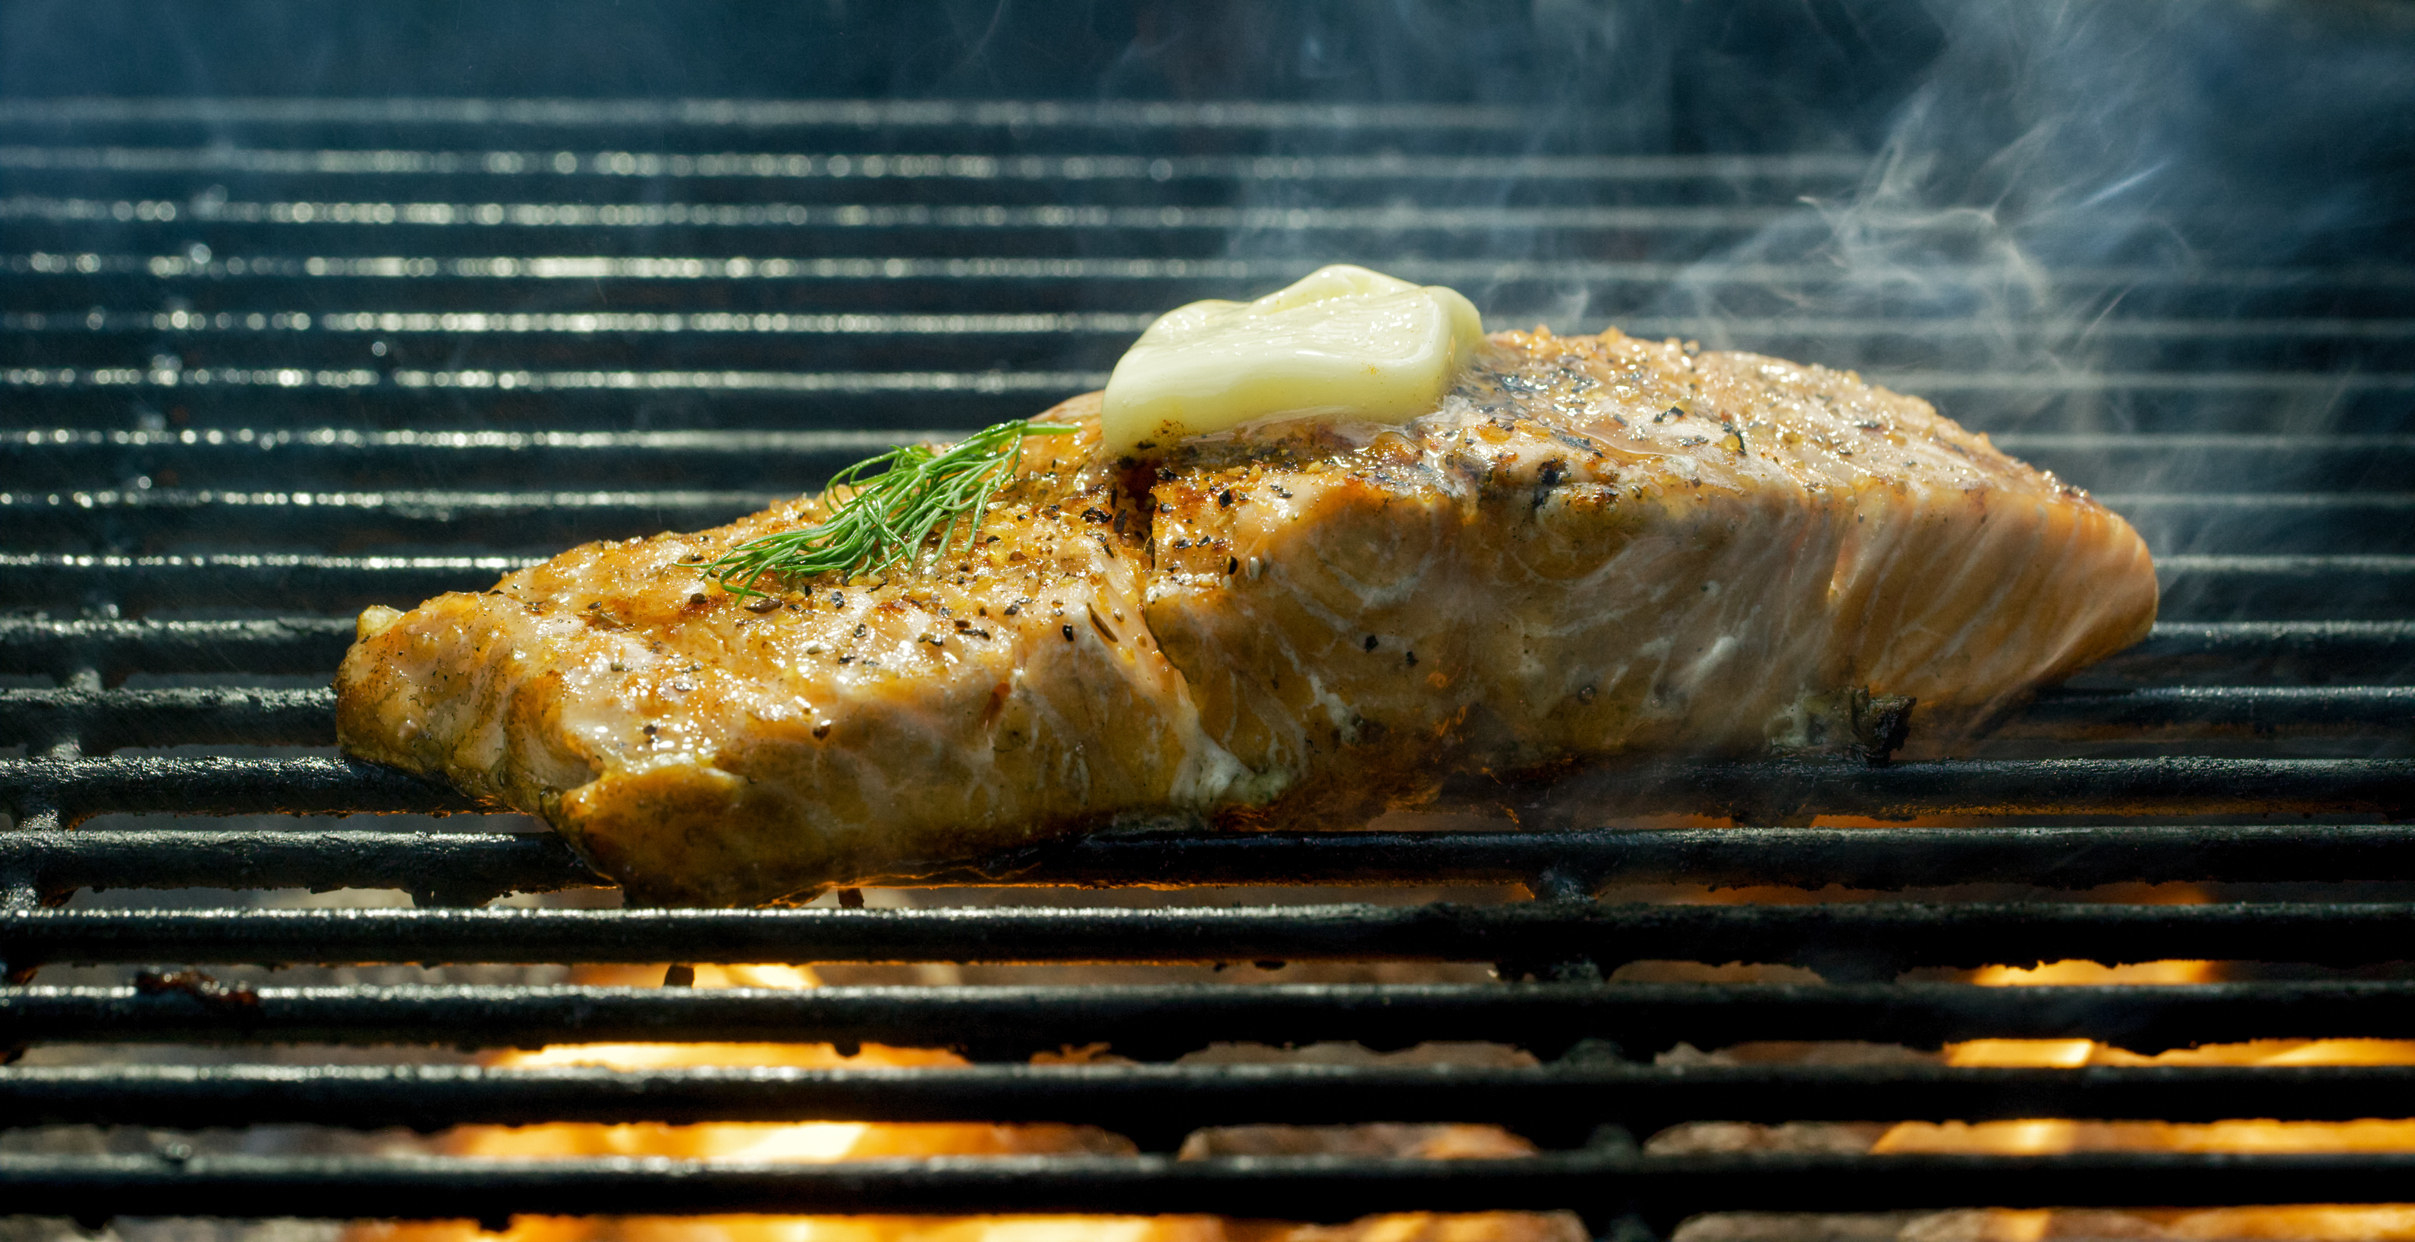 A salmon fillet on the grill